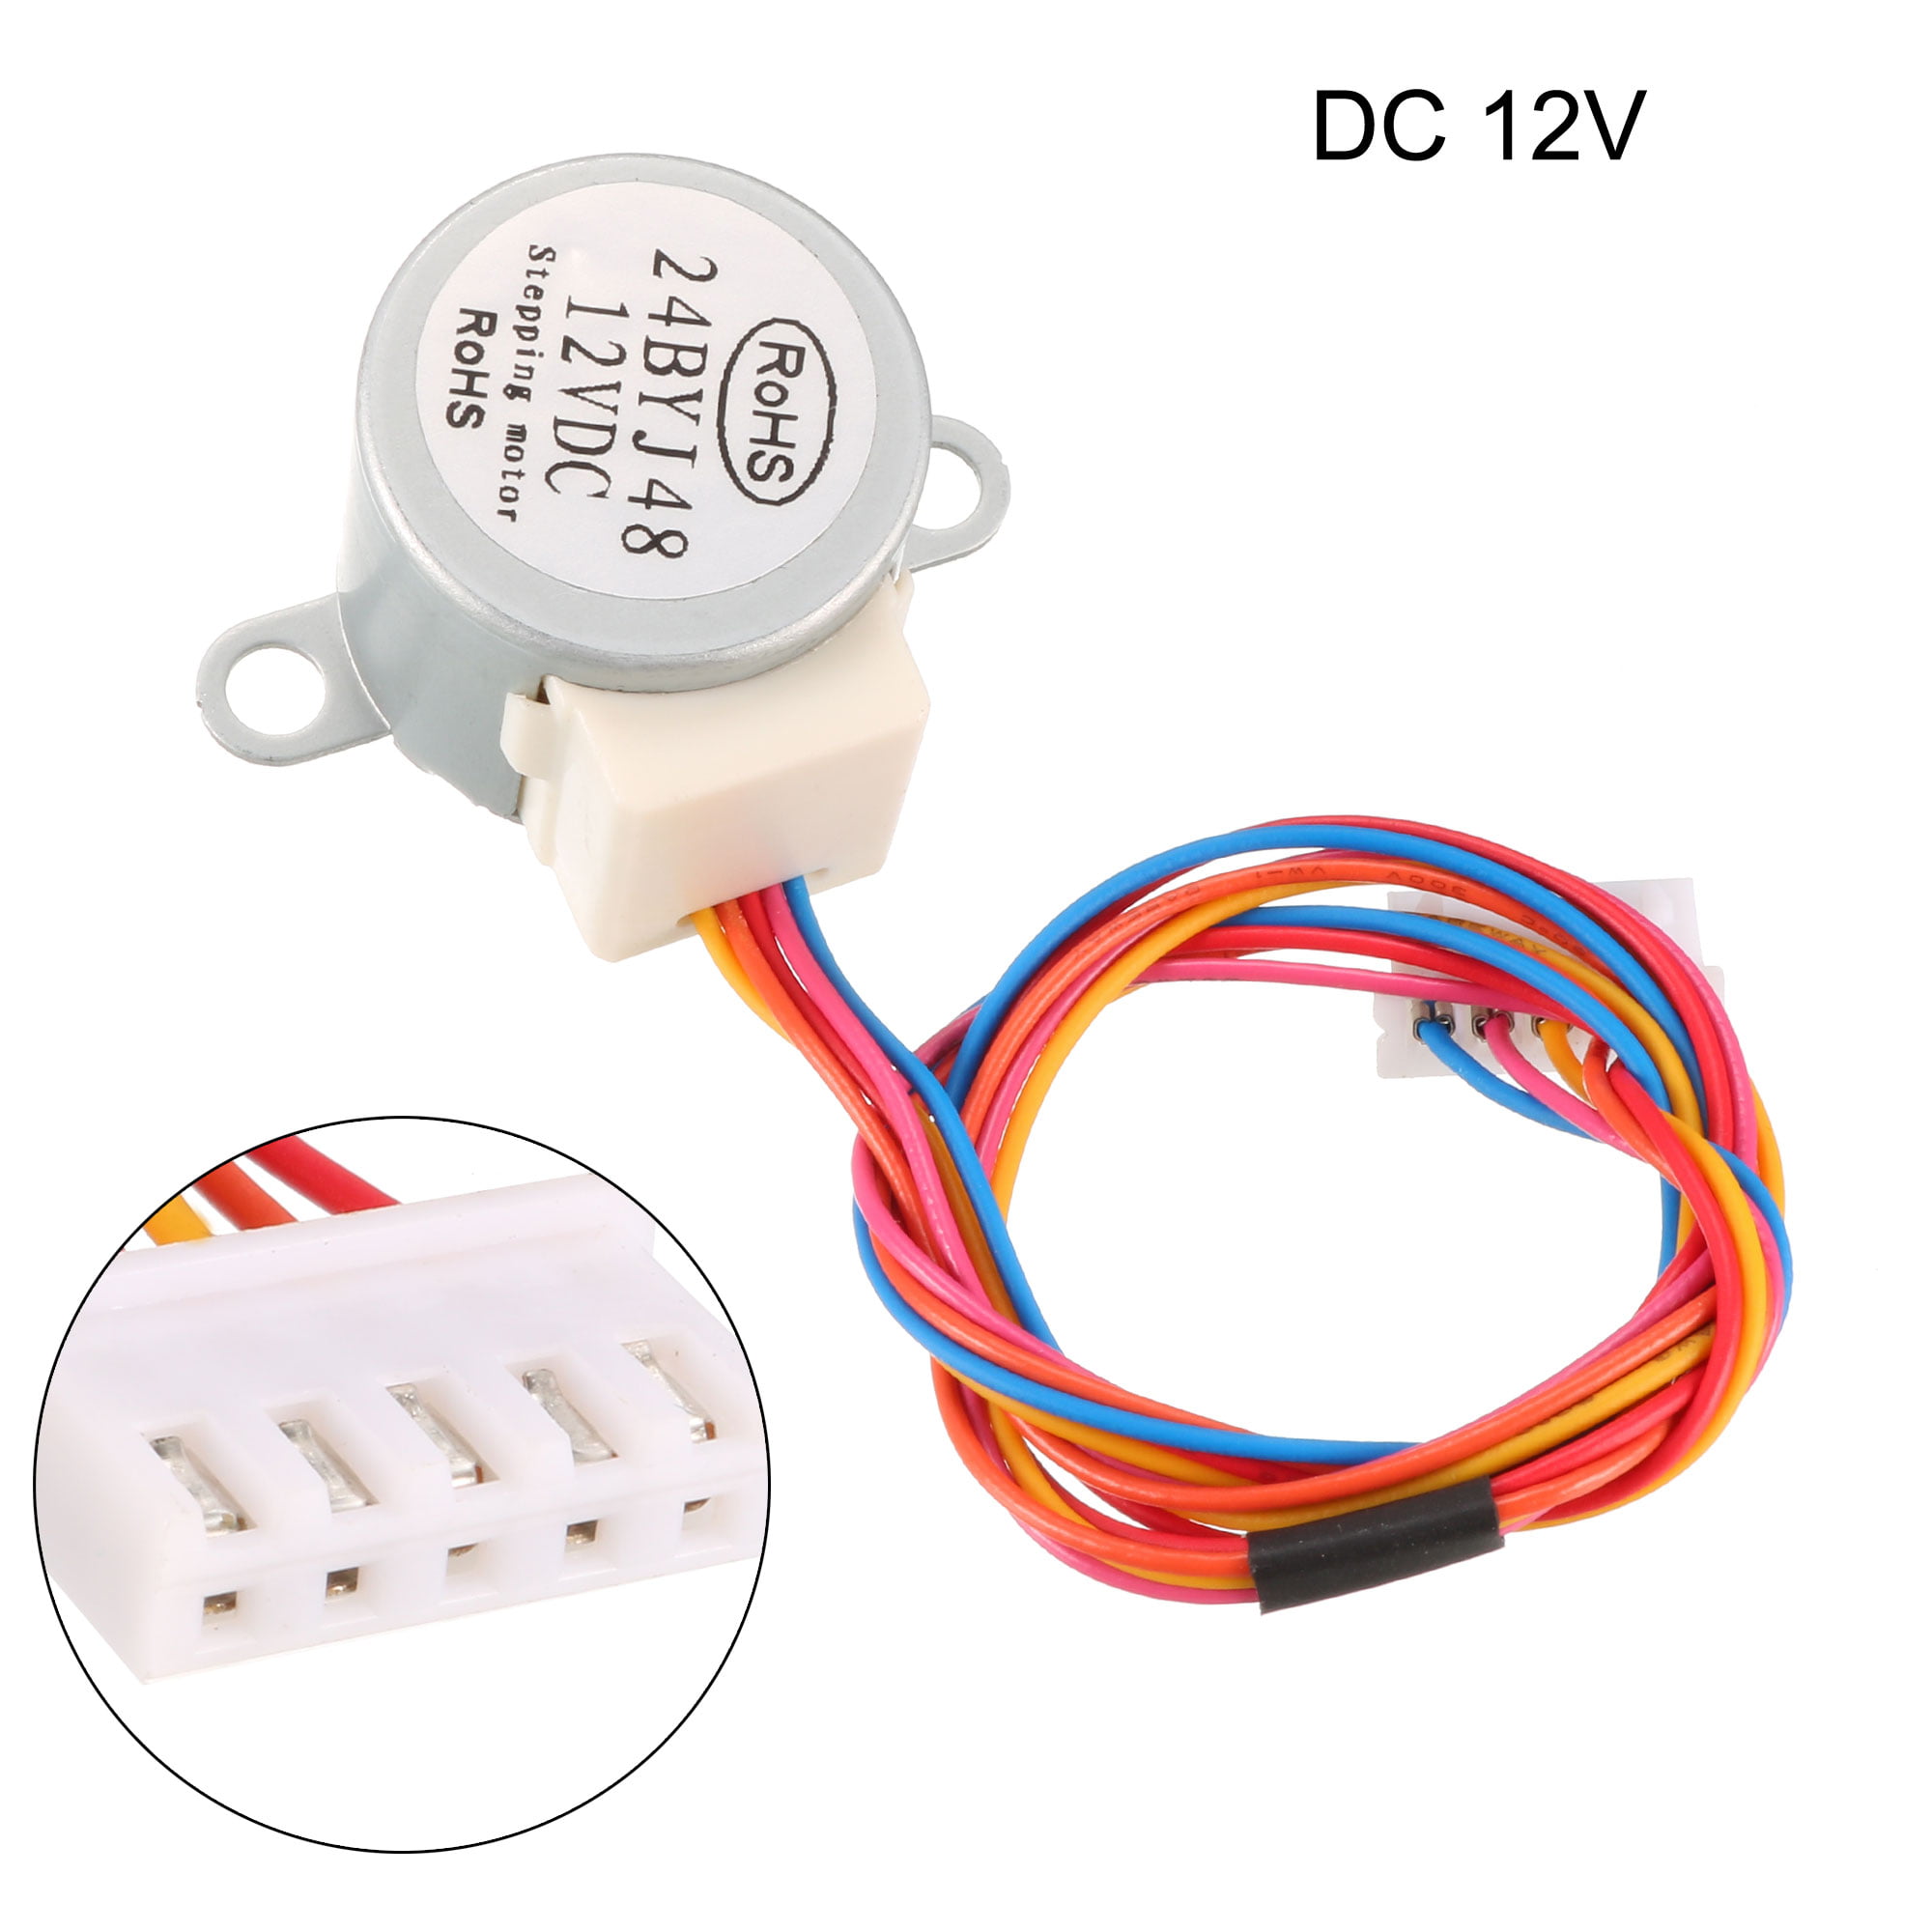 uxcell 2PCS 24BYJ48 DC 5V Reduction Stepper Motor Micro Reducer Motor 4-Phase 5-Wire 1/64 Reduction Ratio 